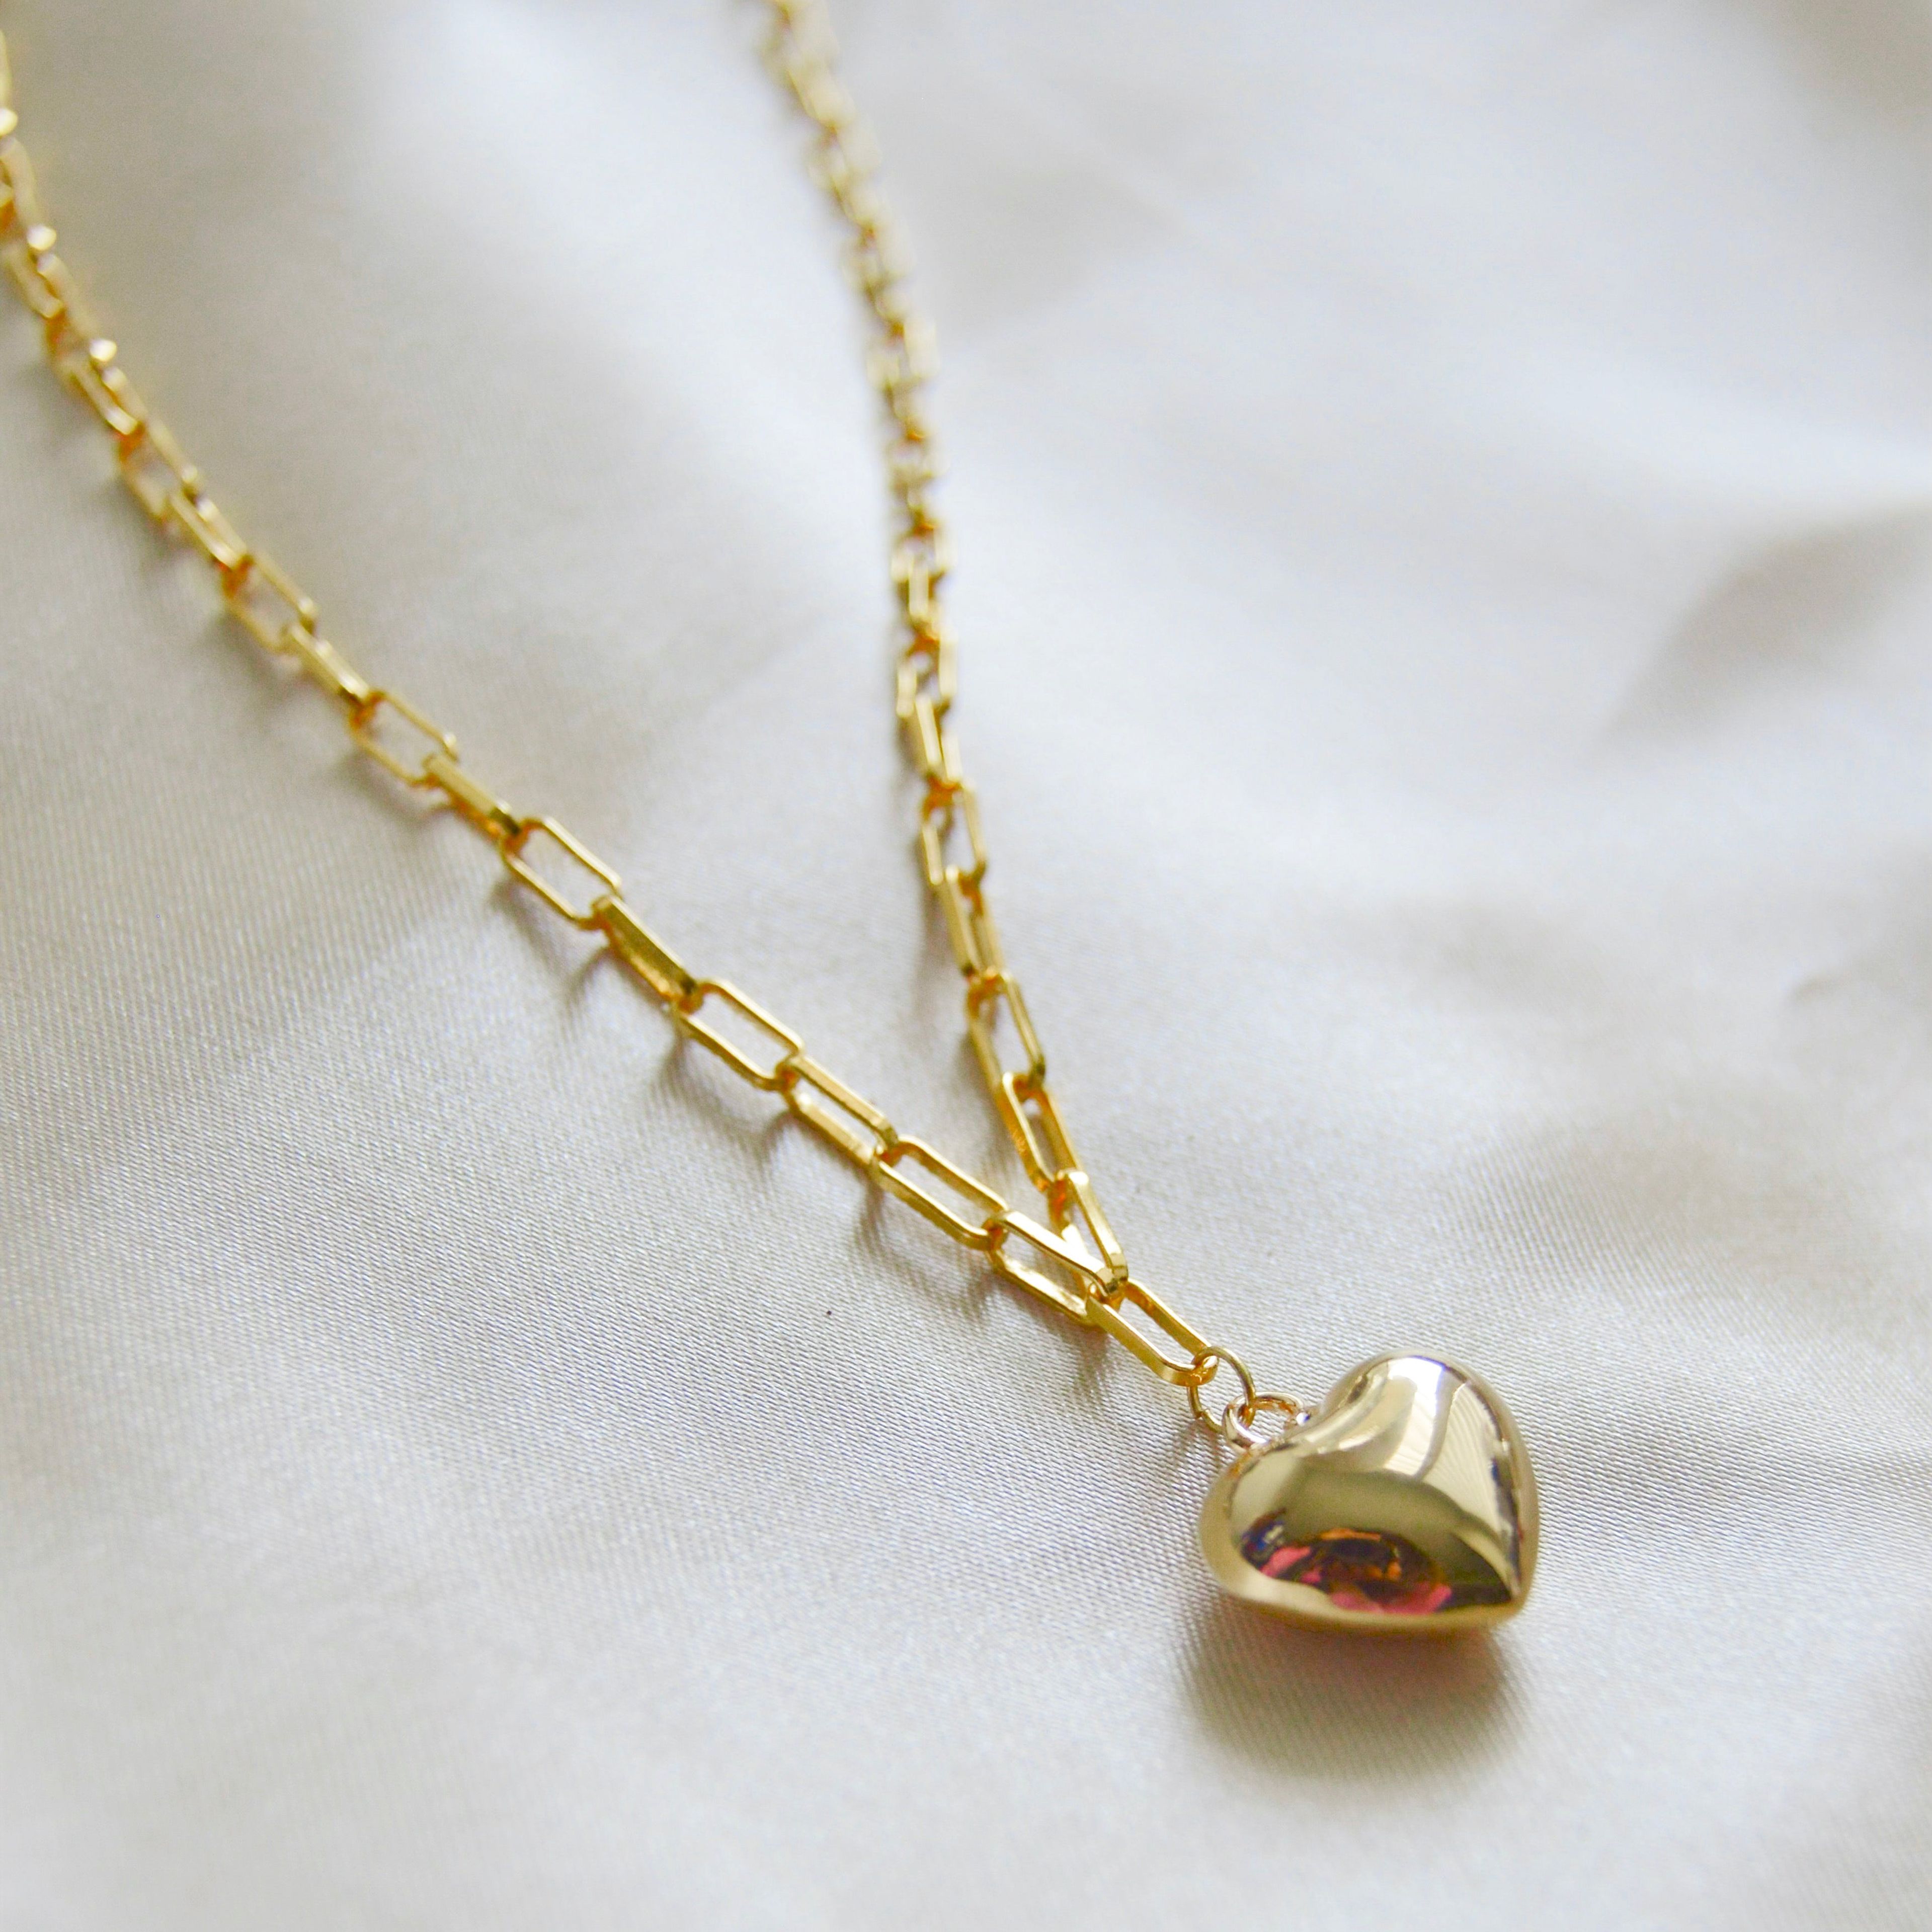 Puffy Heart Paperclip Chain Necklace, 18k Gold Over Sterling Silver